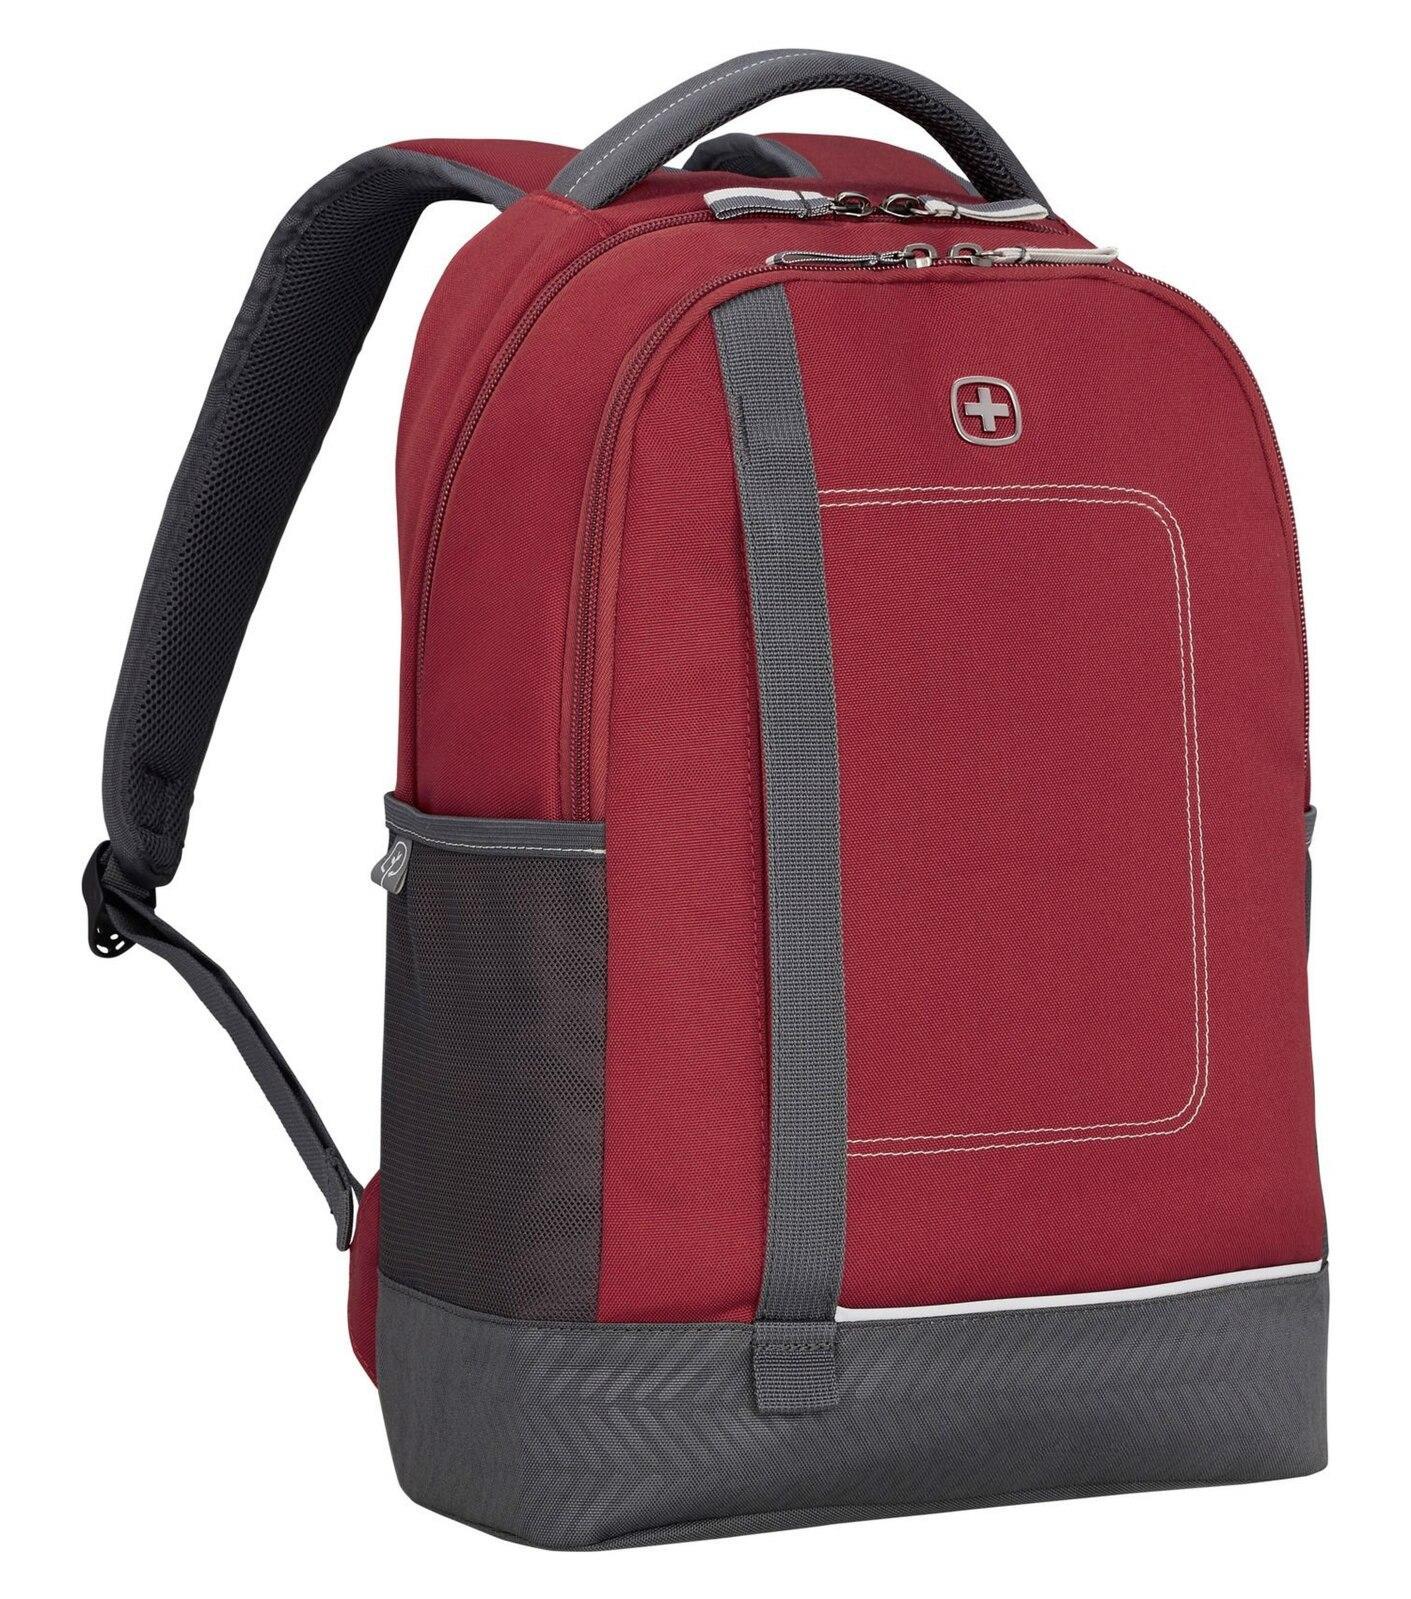 Wenger NEXT Tyon 16'' Laptop Backpack - Red / Anthracite